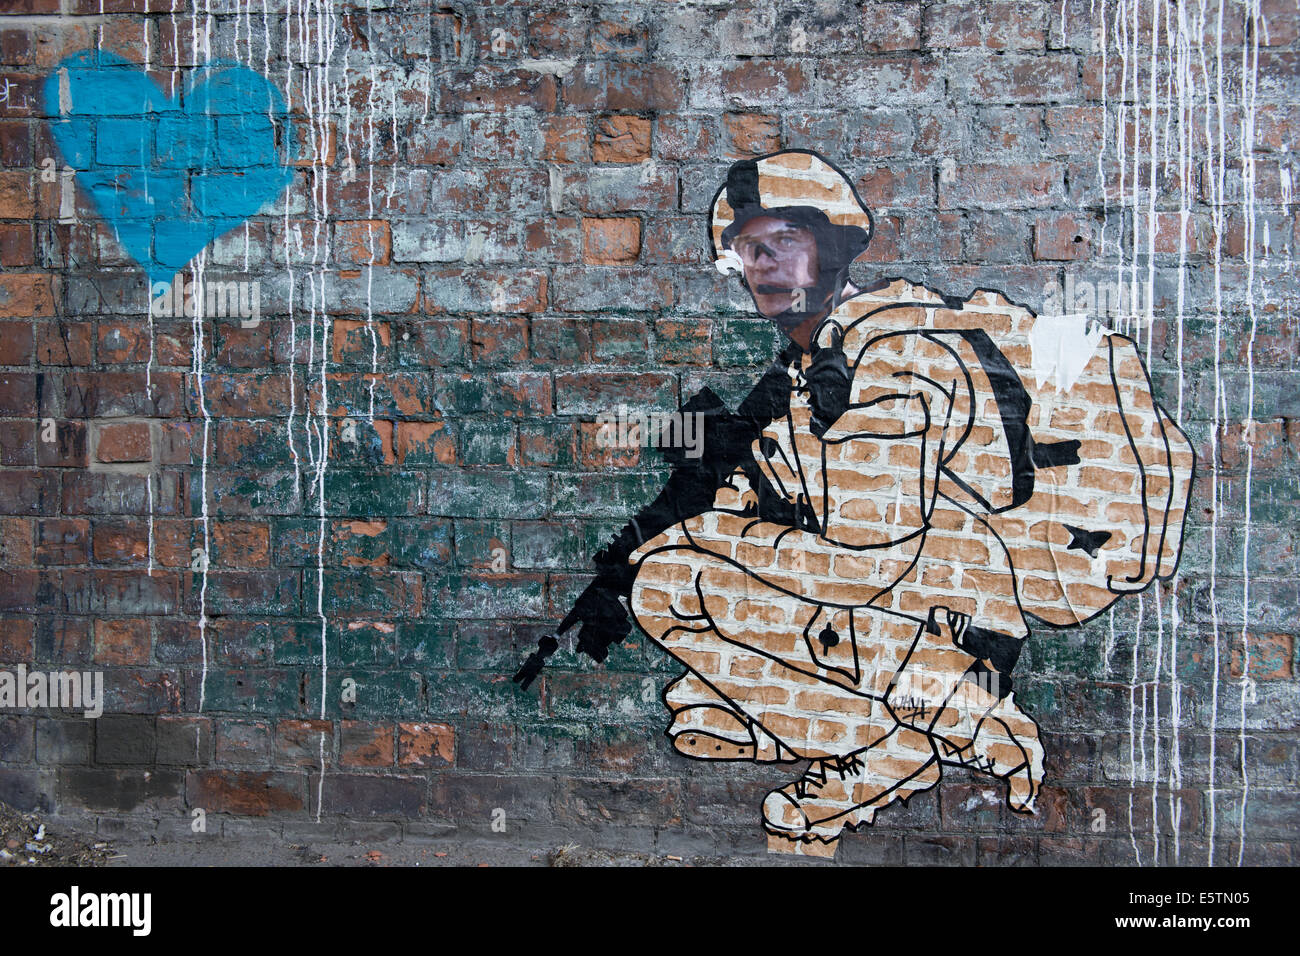 A streetart stencil of a military sniper crouching near a large blue heart. Stock Photo